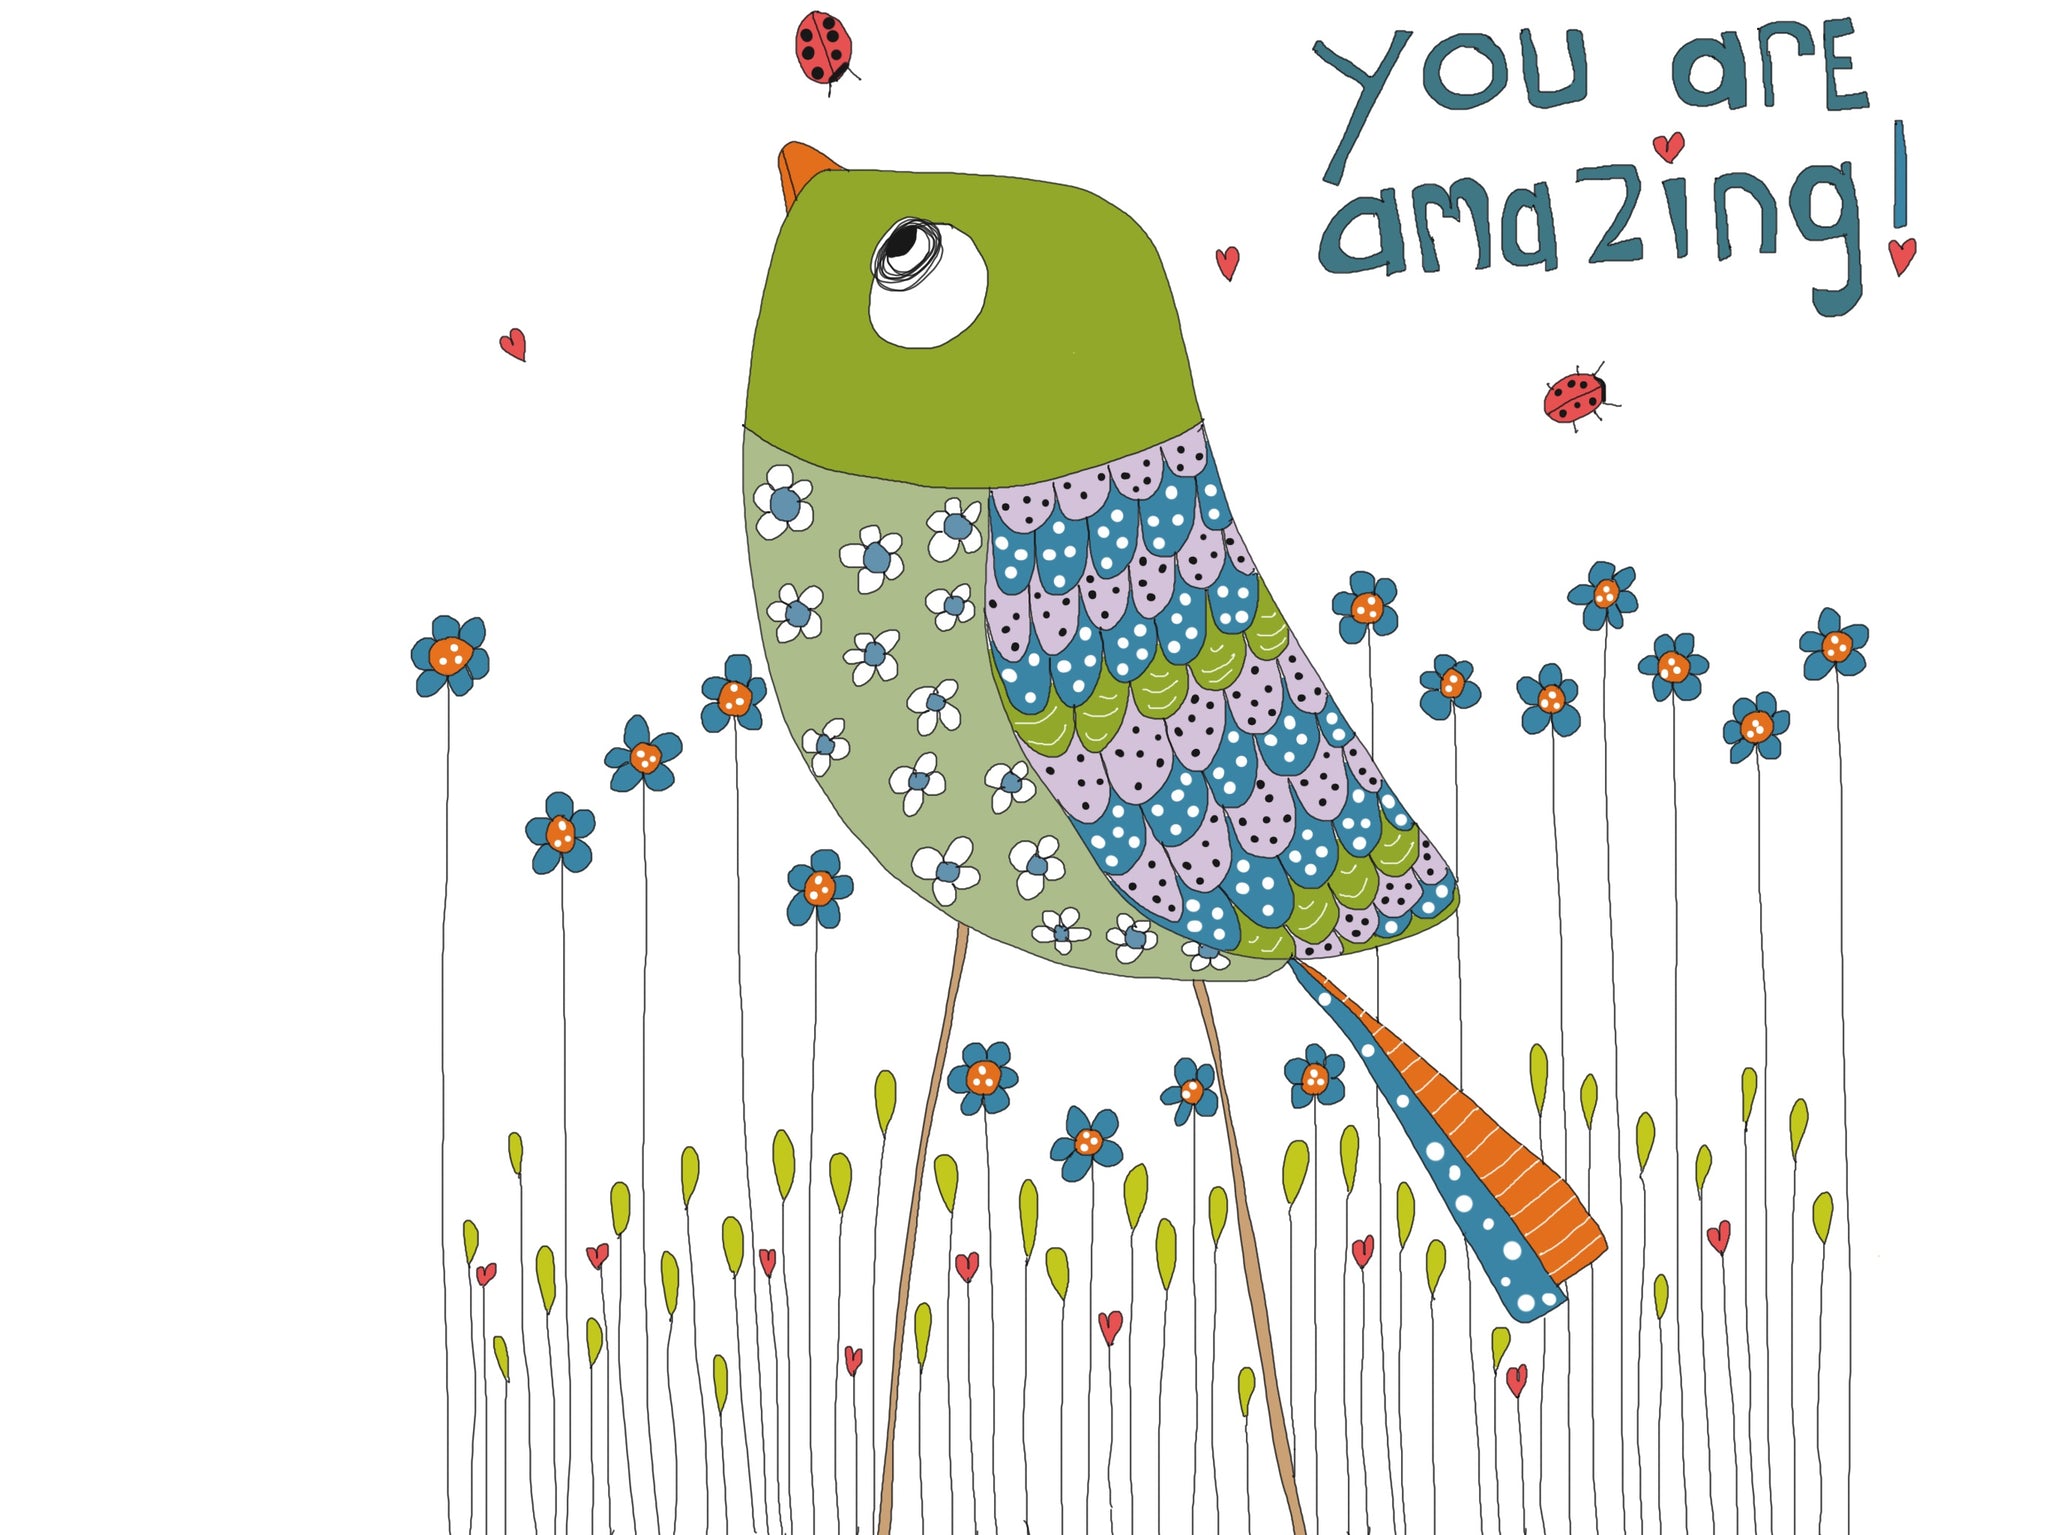 Greeting card "You are amazing"